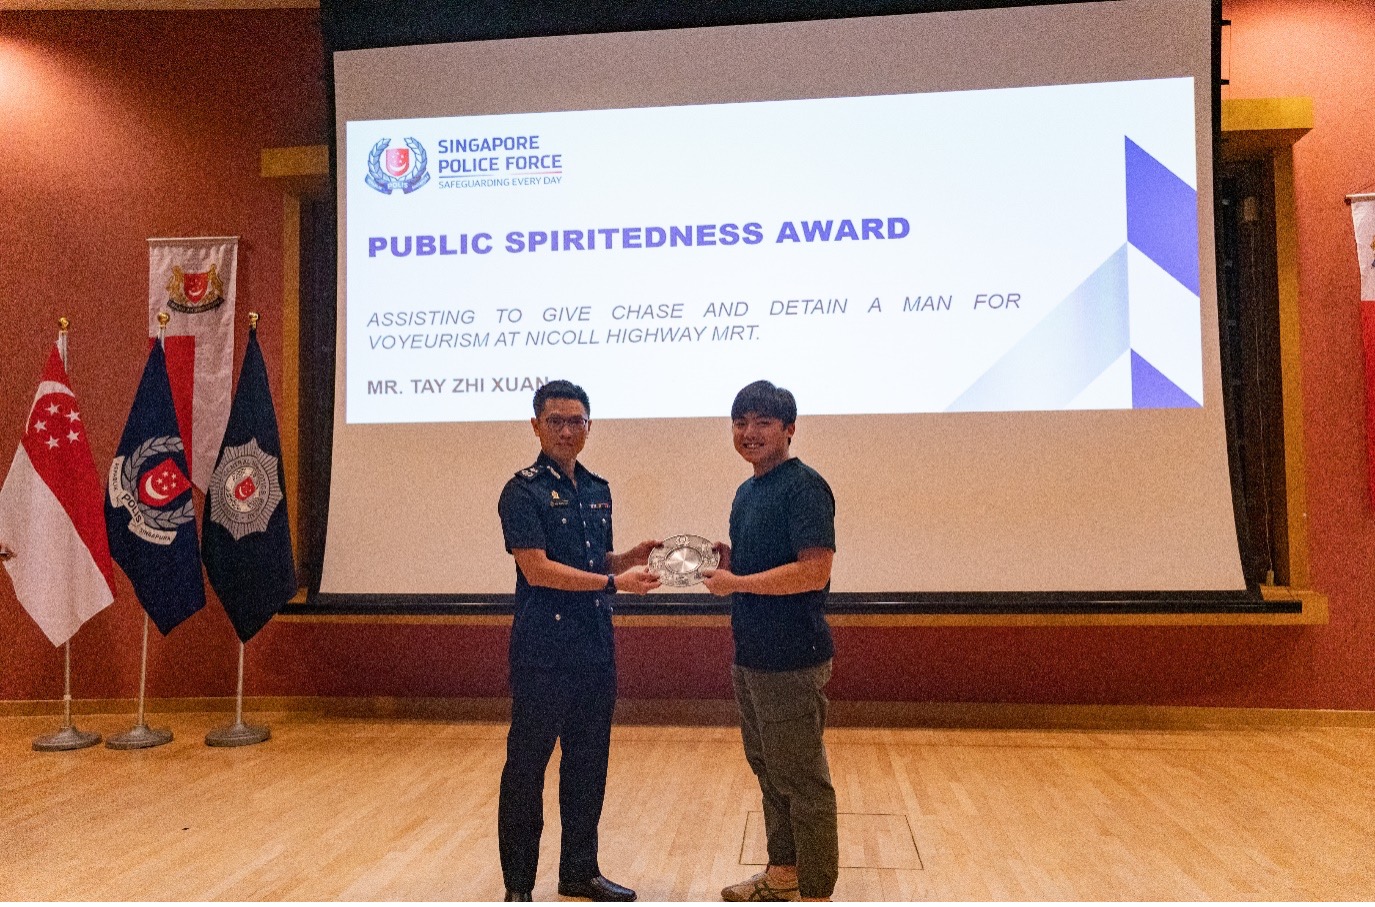 20220818_eleven_members_of_the_public_presented_with_public_spiritedness_award5